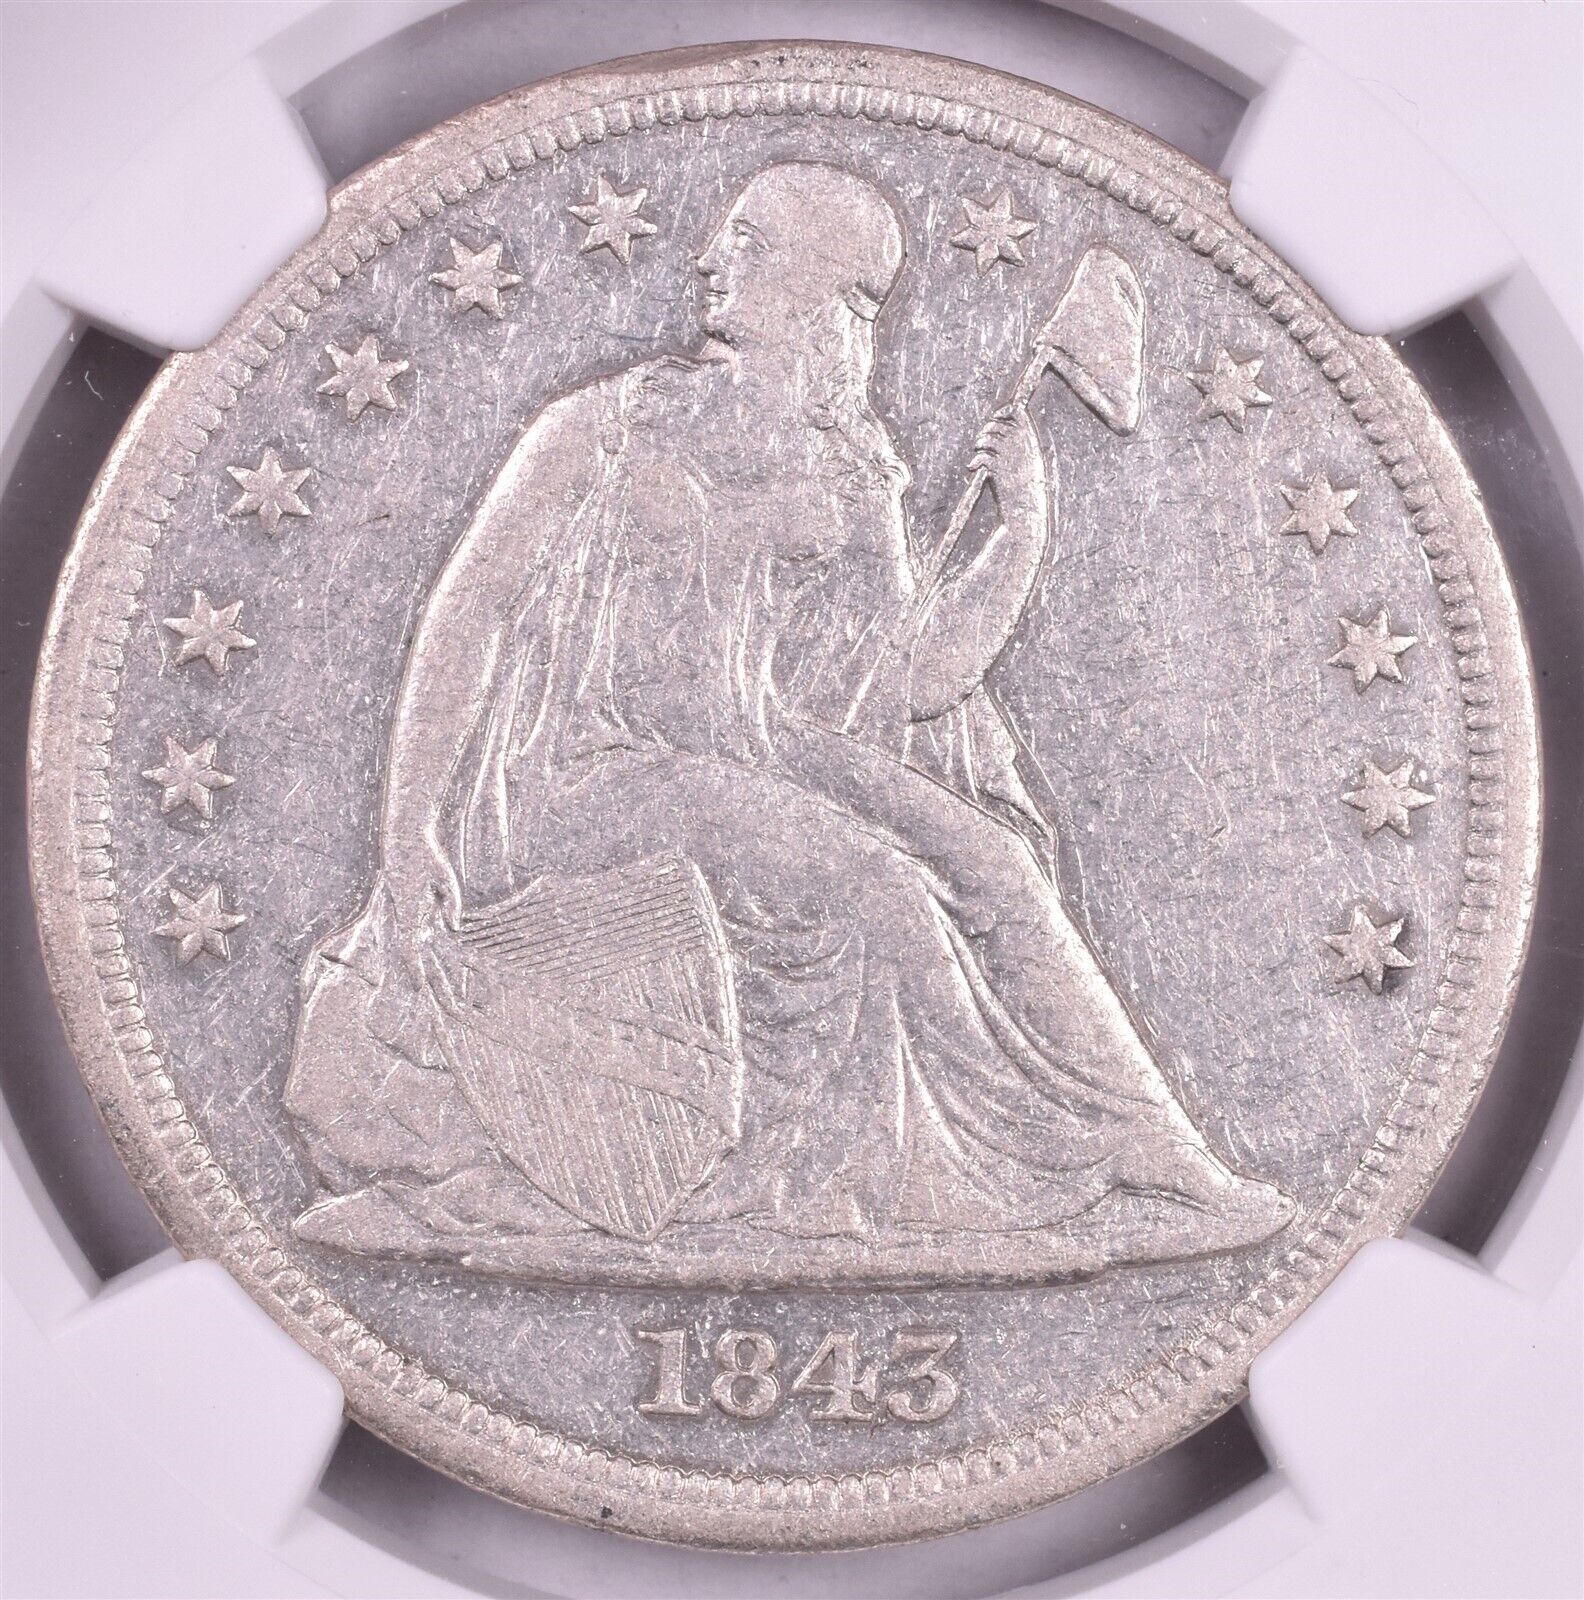 1843 Seated Liberty Silver Dollar - Ngc Xf Details